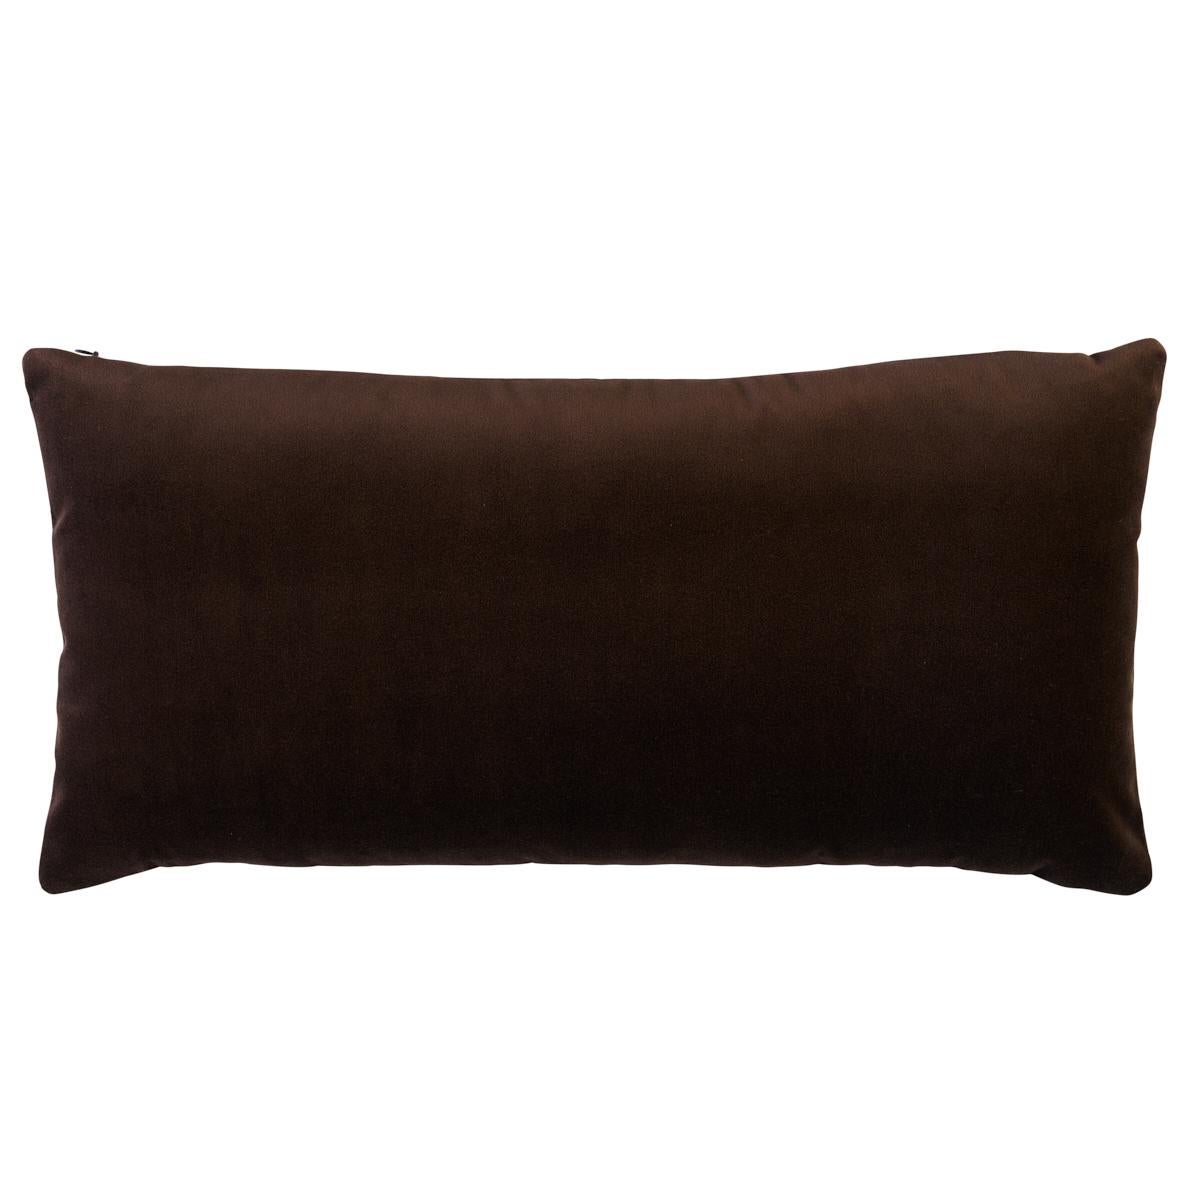 This pillow features Delphi Beaded Tape with a knife edge finish. A luxe, hand-beaded Greek key design, Delphi Beaded Tape elevates a classic motif to glamourous new heights. Body of pillow is Rocky Performance Velvet. Pillow includes a feather/down